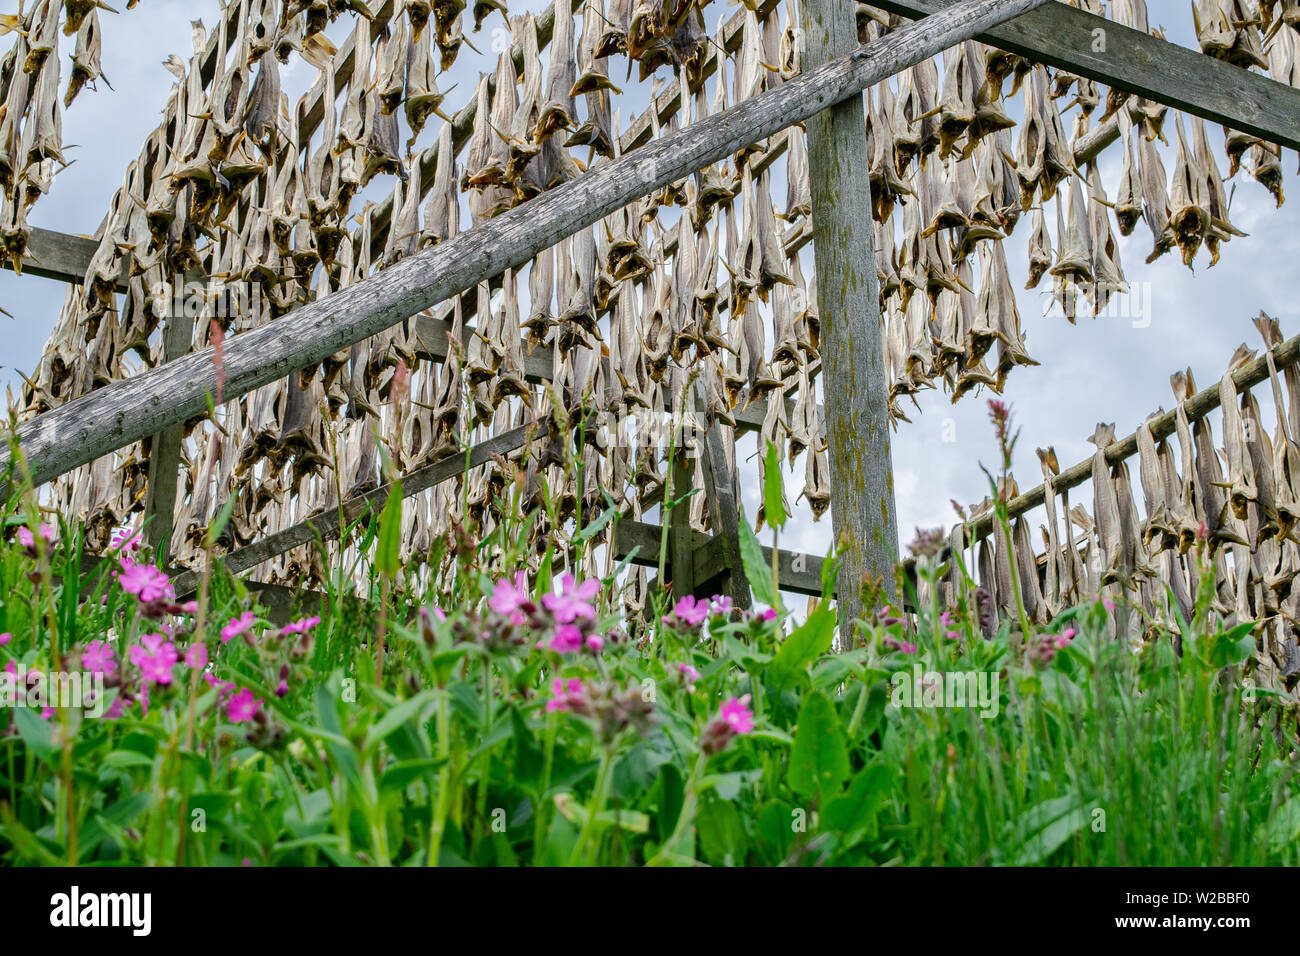 Spring flowers bask in the arctic sun underneath a rack of drying cod in the Lofoten Islands of northern Norway. Stock Photo